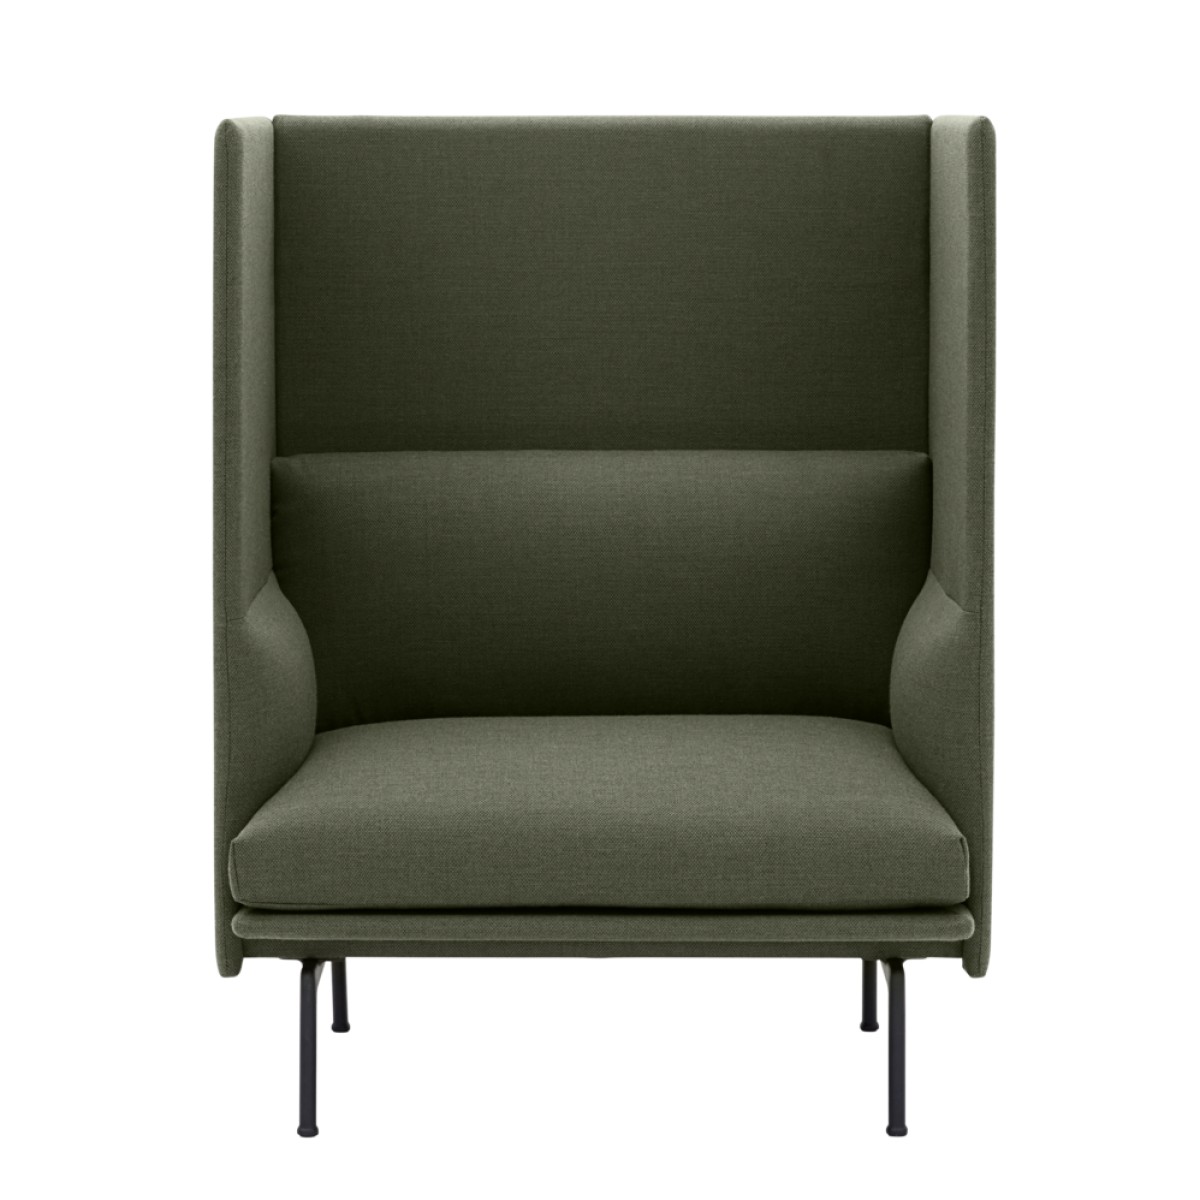 Outline Highback Sofa 100 / 1-Seater Seat Height 45 cm